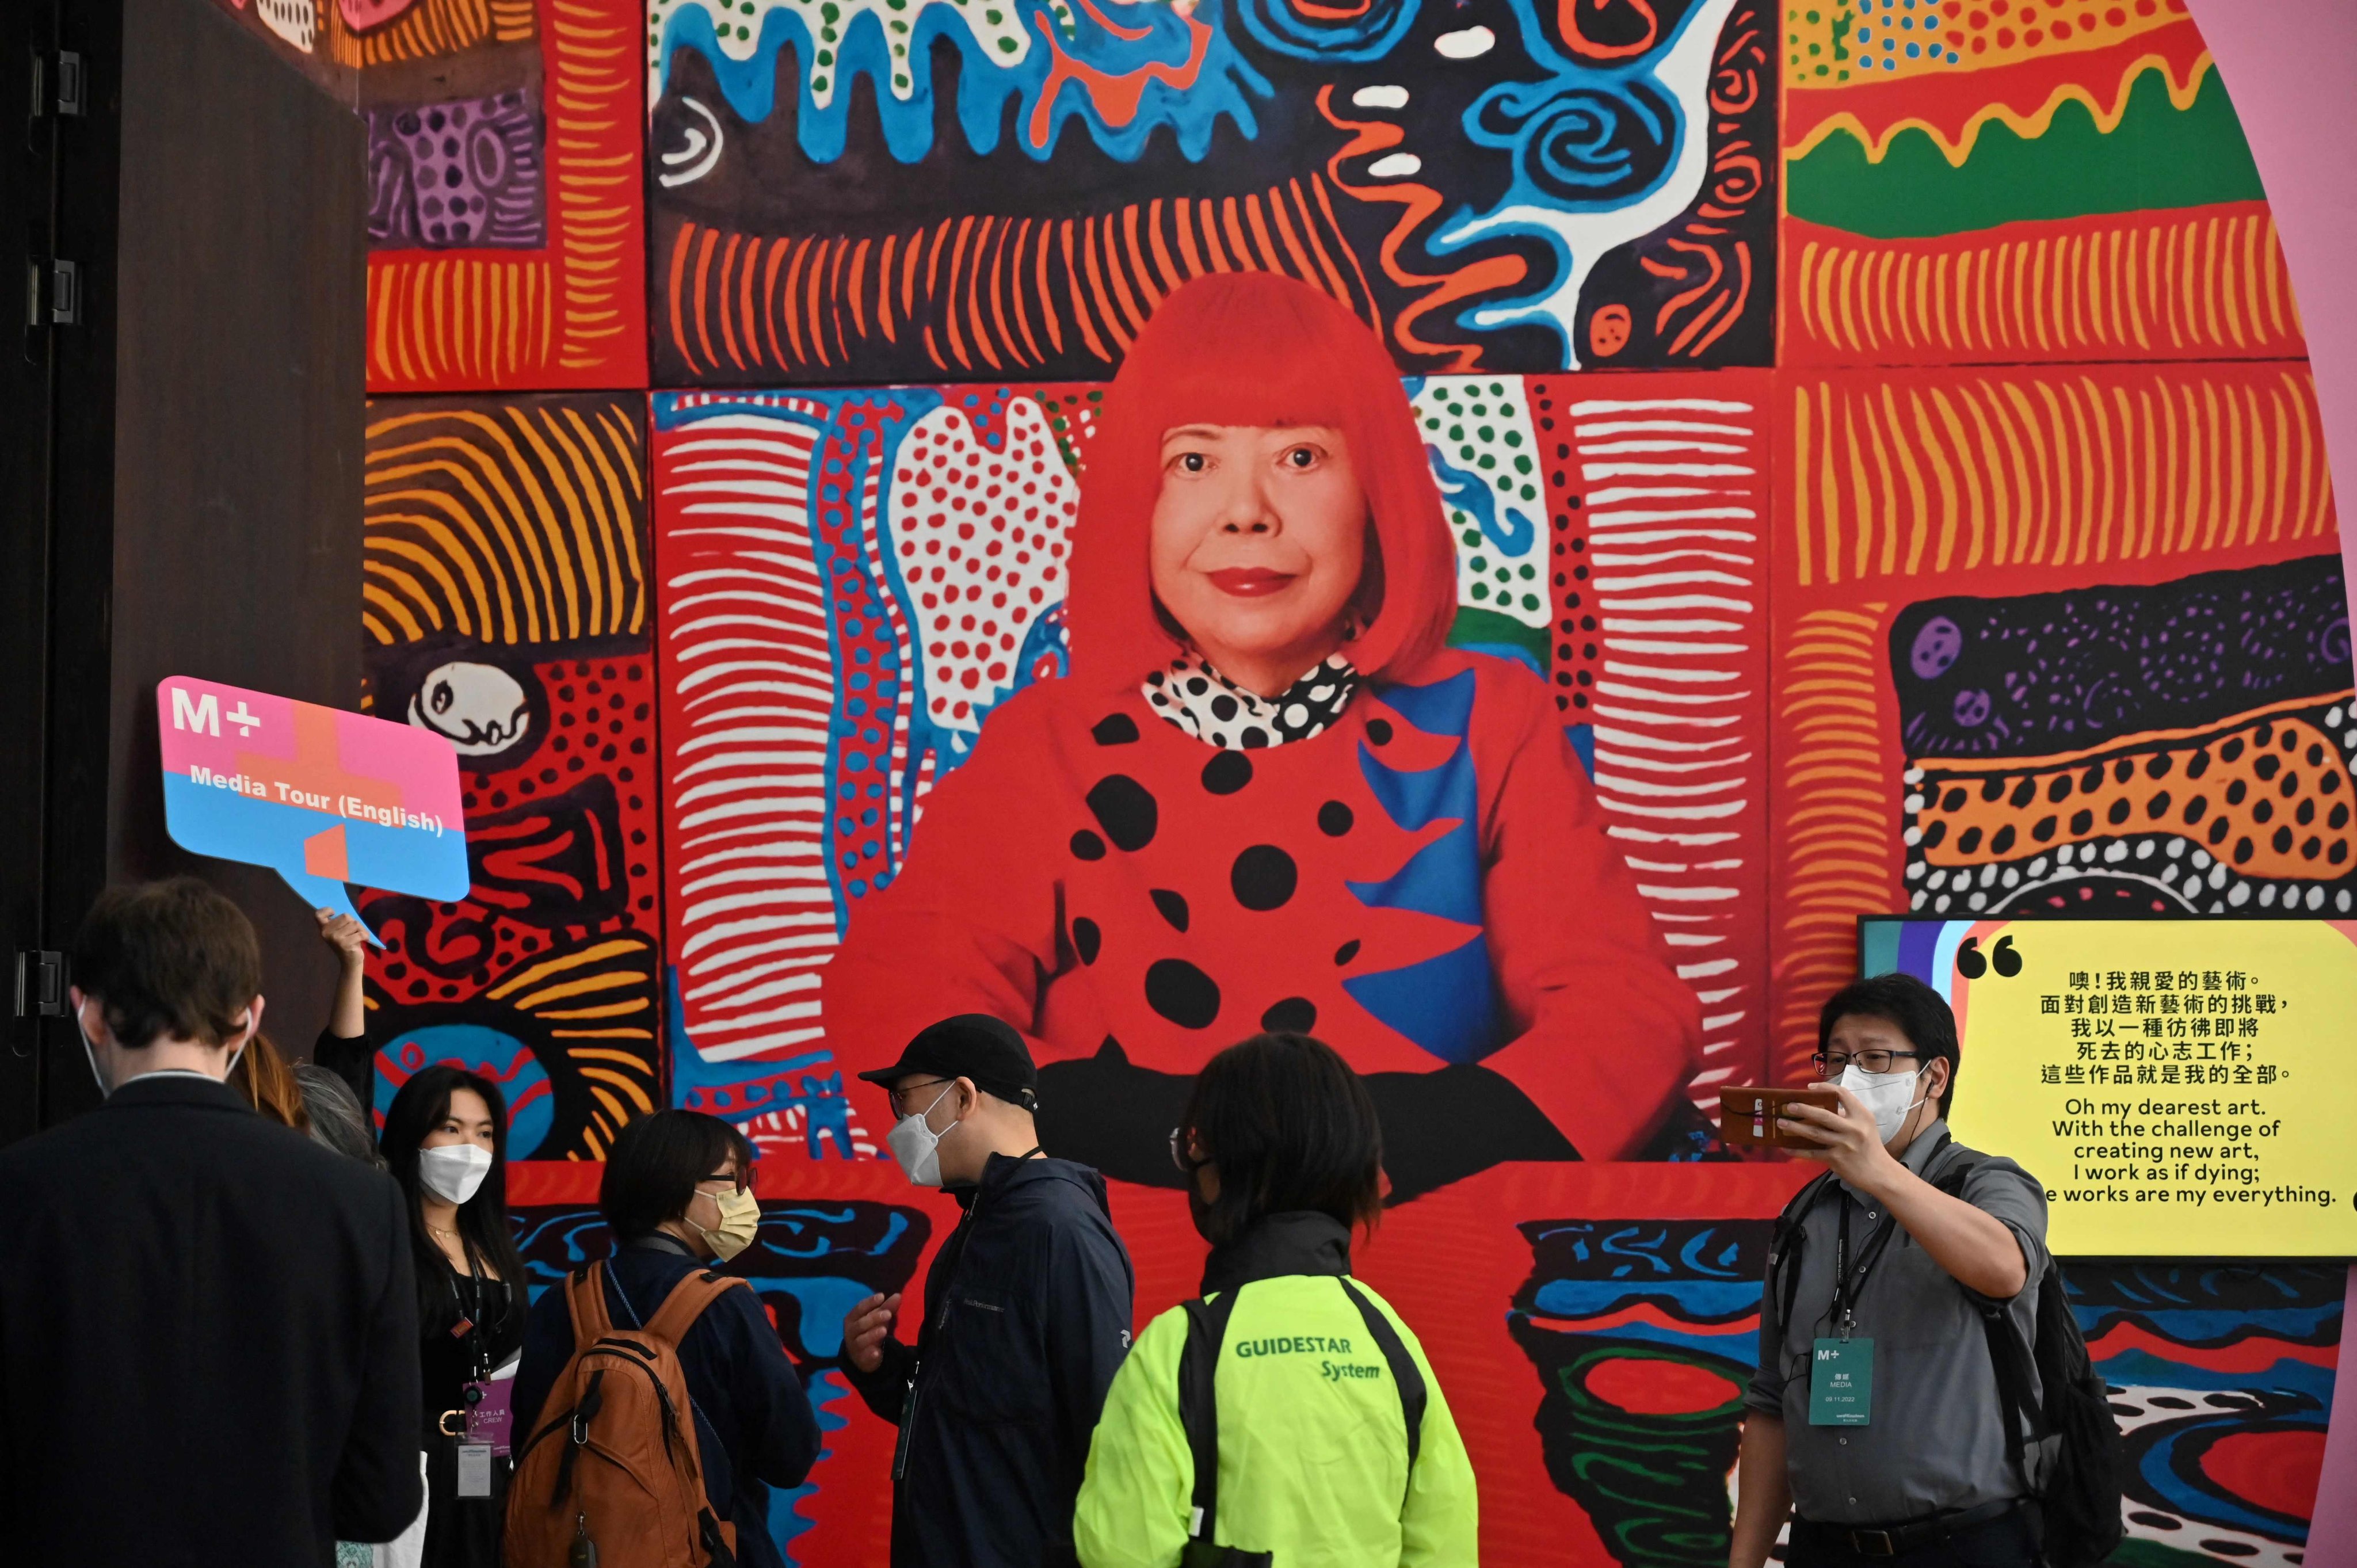 The Japanese artist’s exhibition at the M+ museum is titled “Yayoi Kusama: 1945 to Now”. Photo: AFP